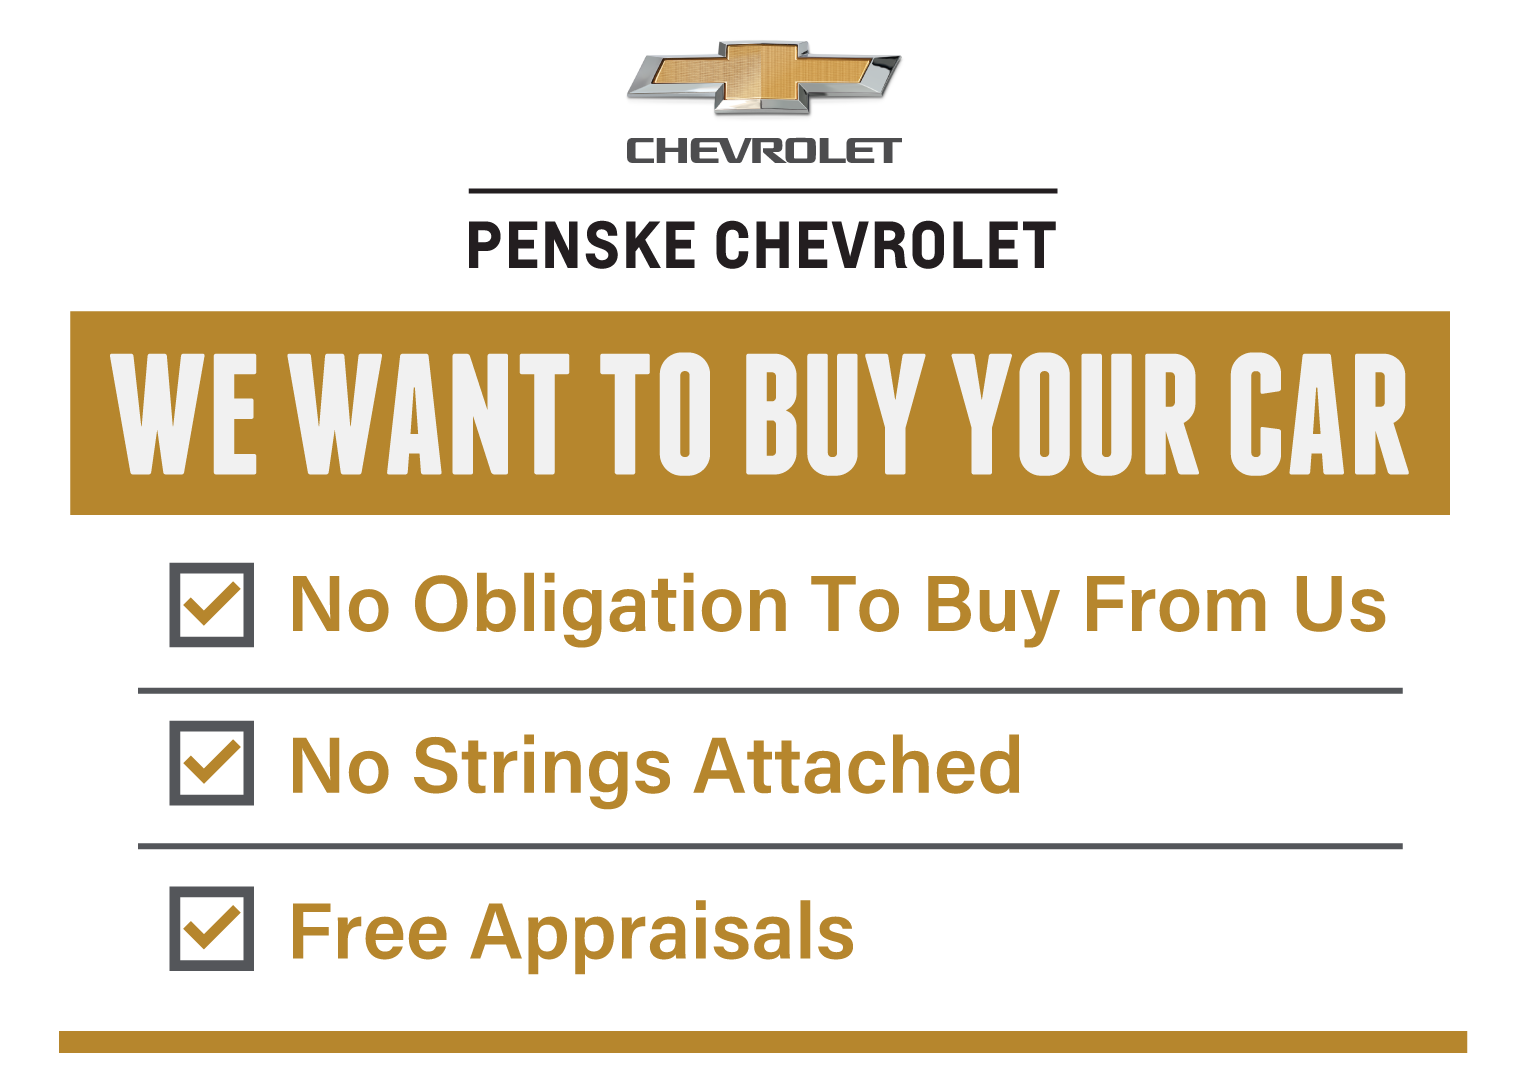 We want to Buy Your Car at Penske Chevrolet. No Obligation To Buy From Us. No Strings Attached. Free Appraisals.